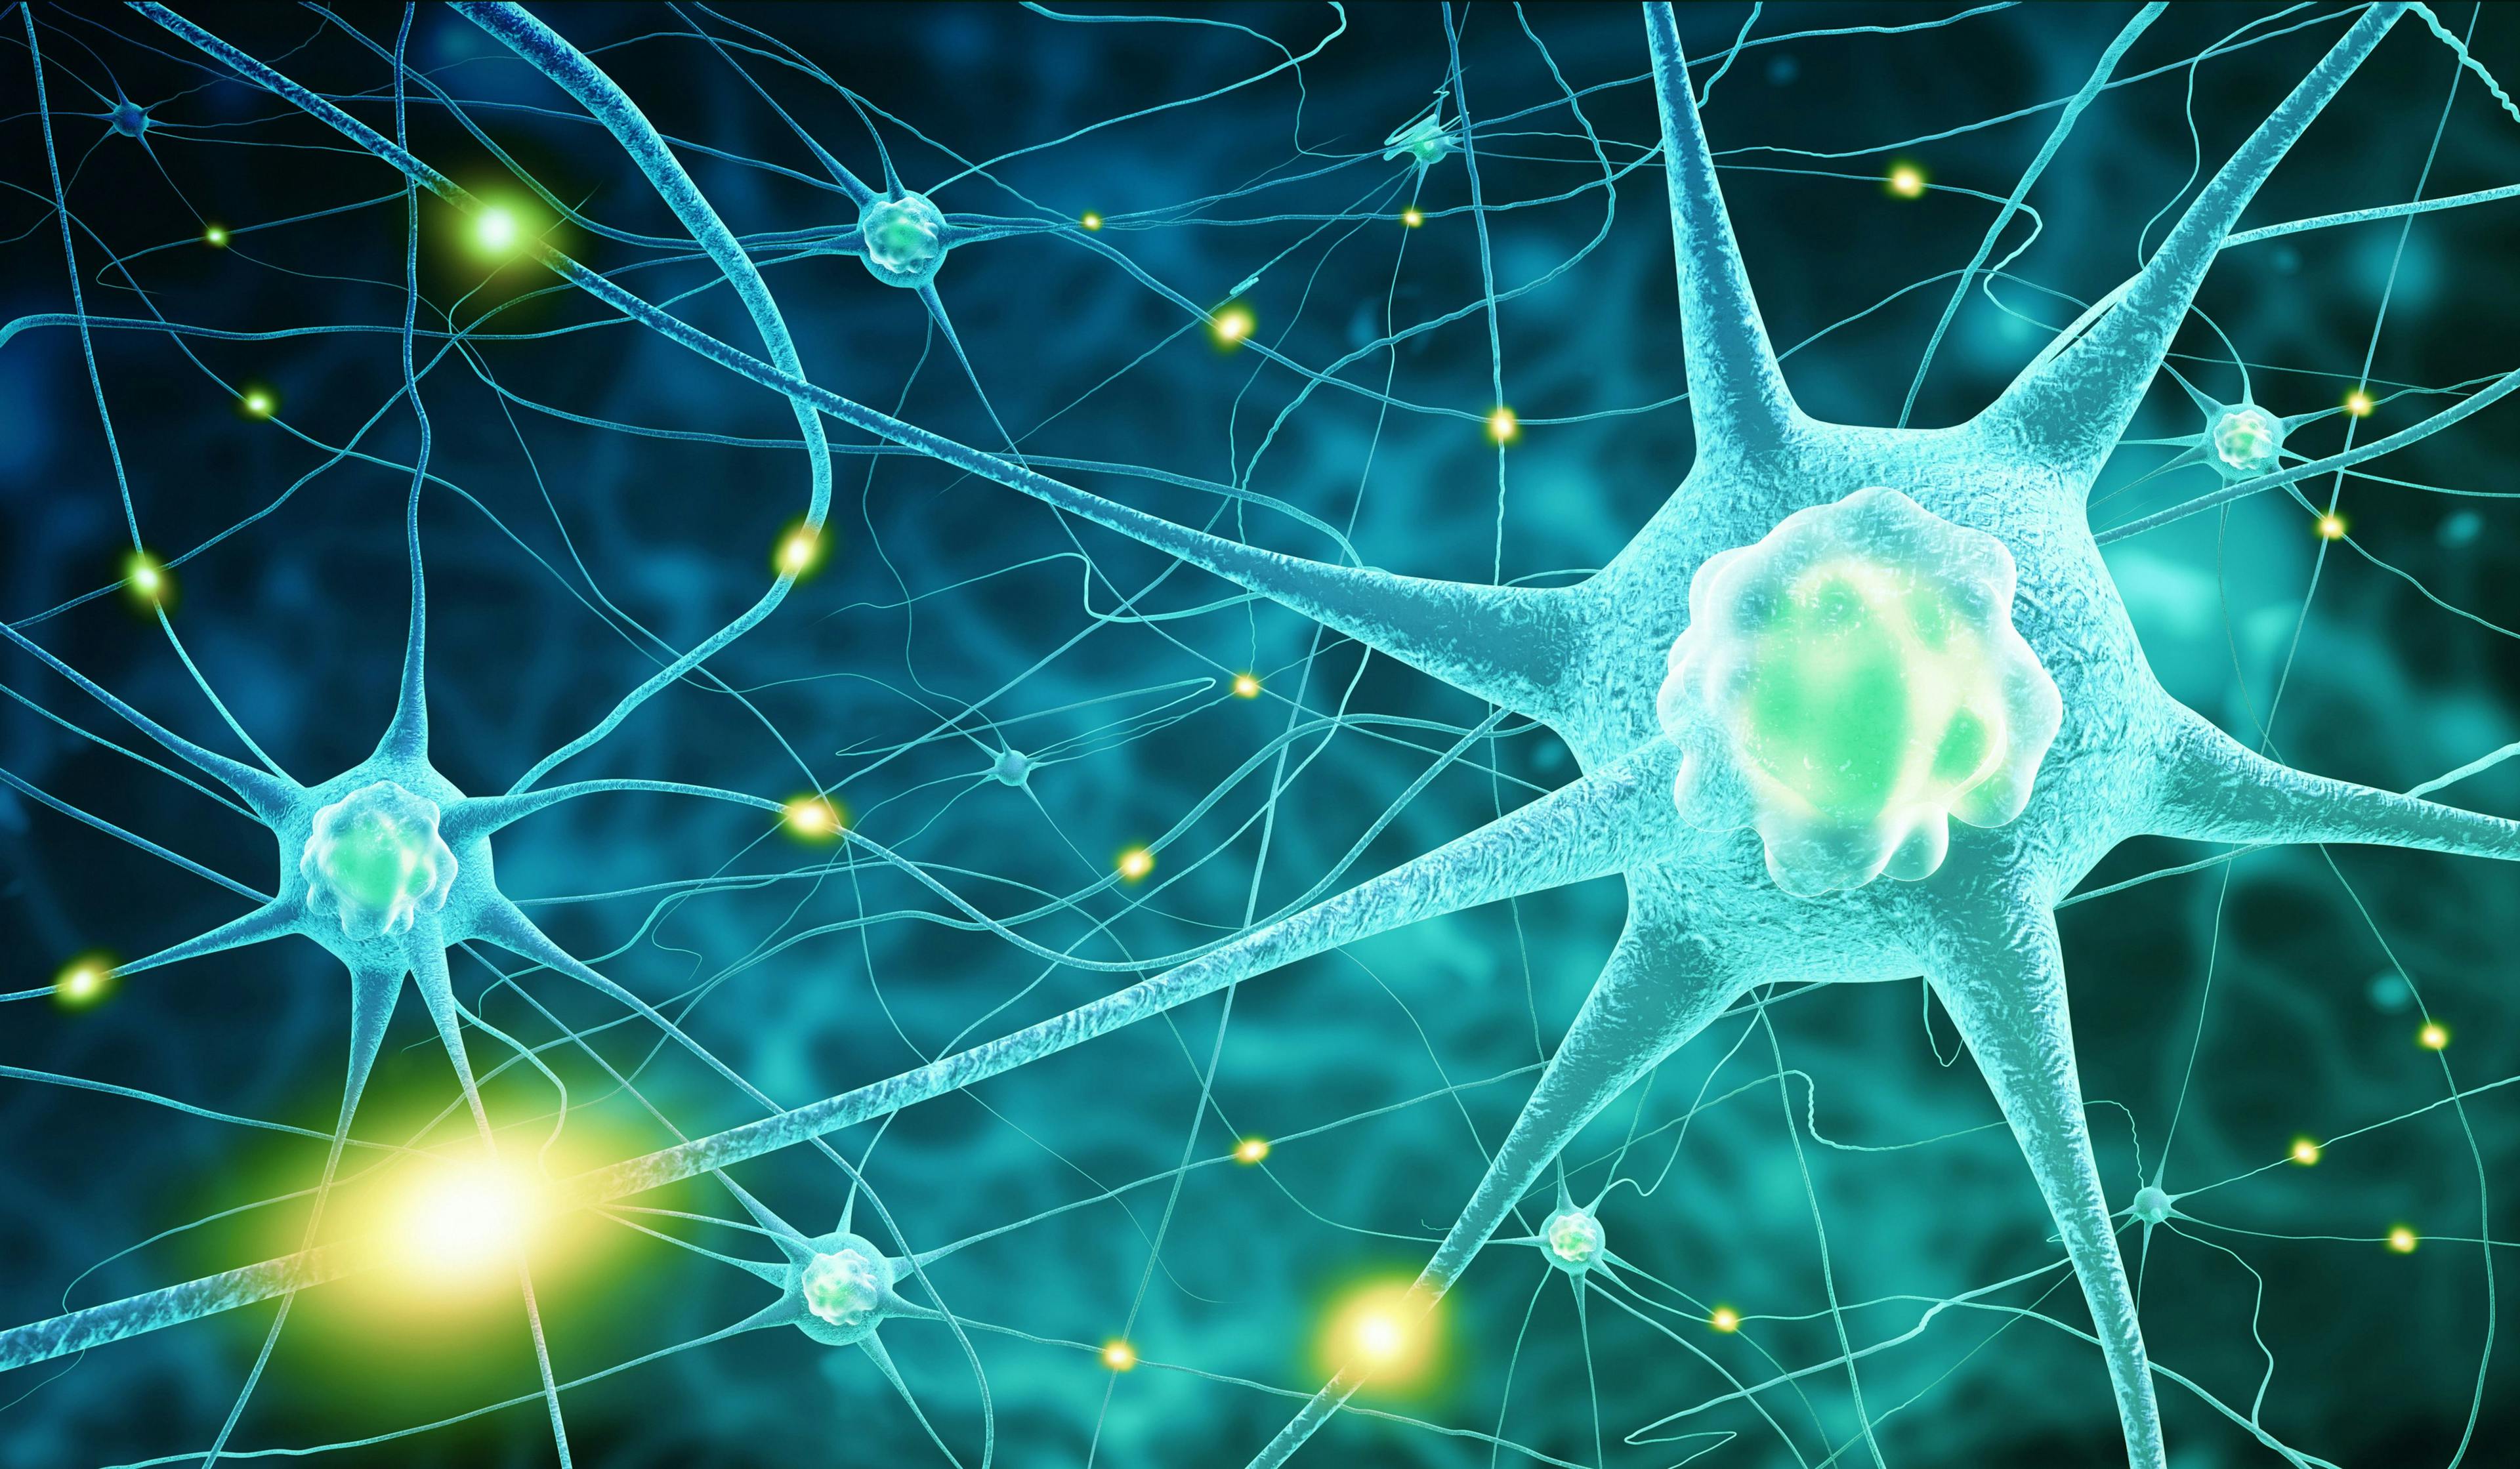 SK Life Science Presents Long-Term Data of XCOPRI for Treatment of Seizures